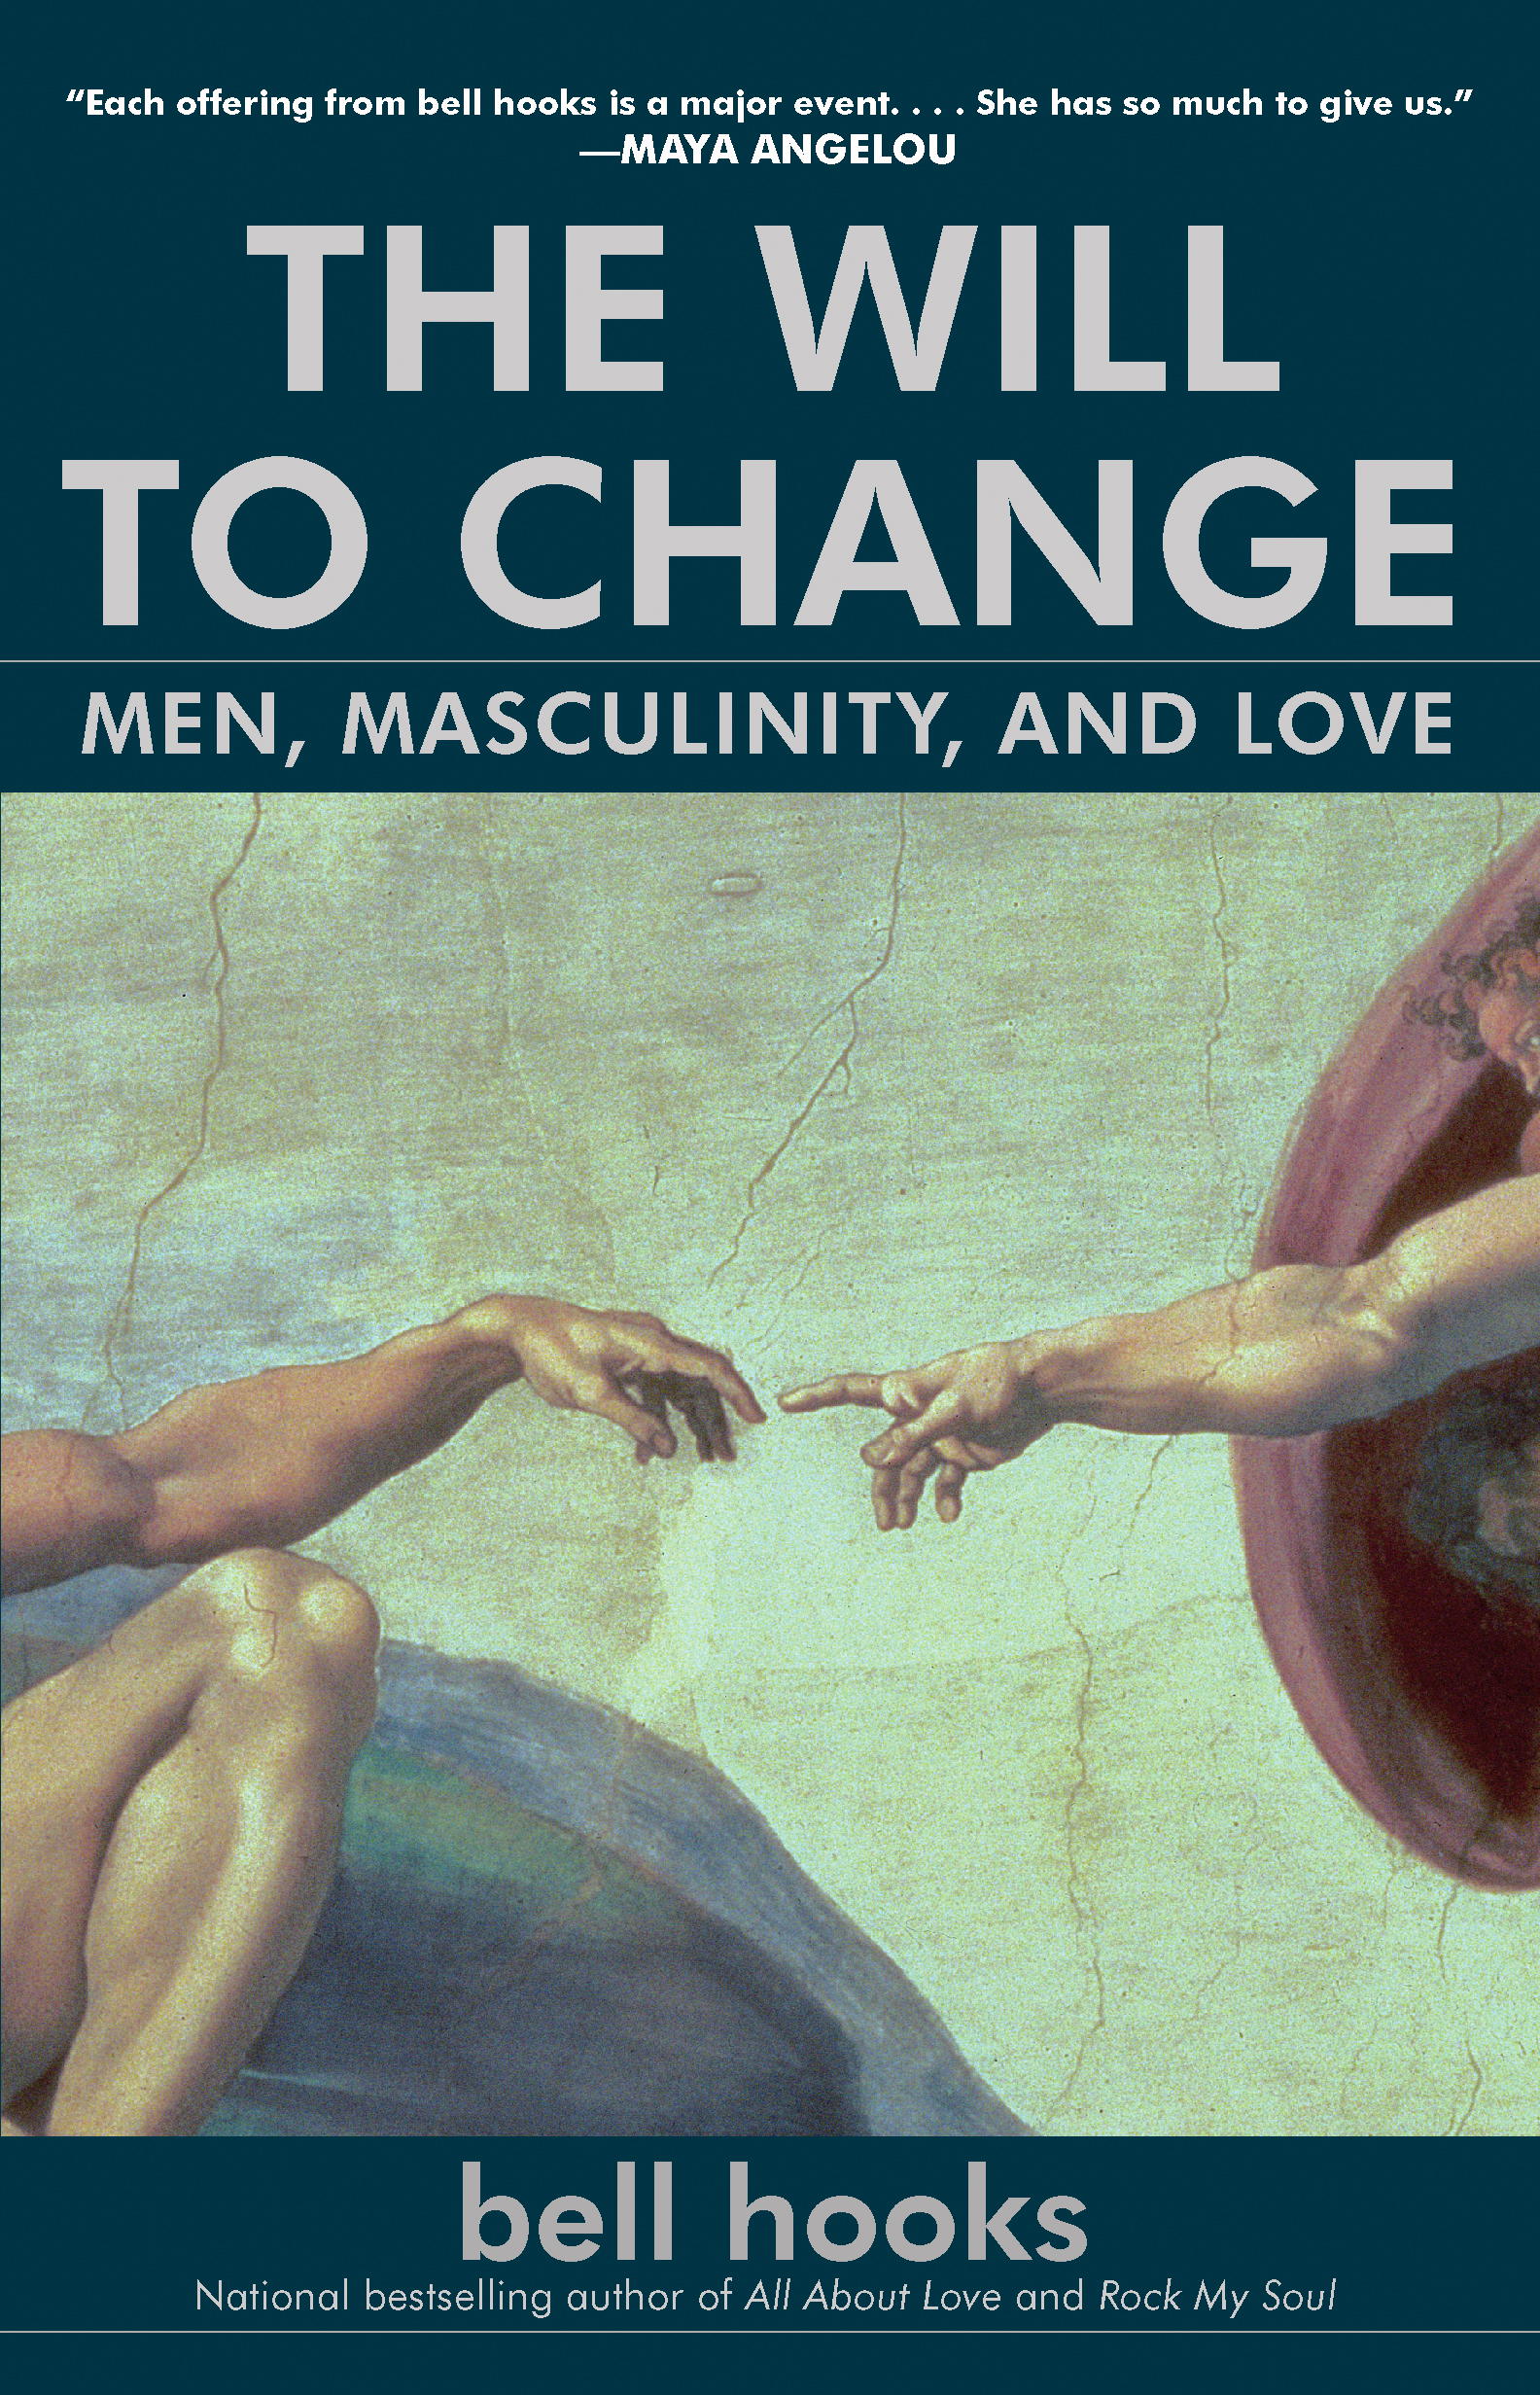 bell hooks: The Will to Change: Men, Masculinity, and Love (2003, Atria Books)